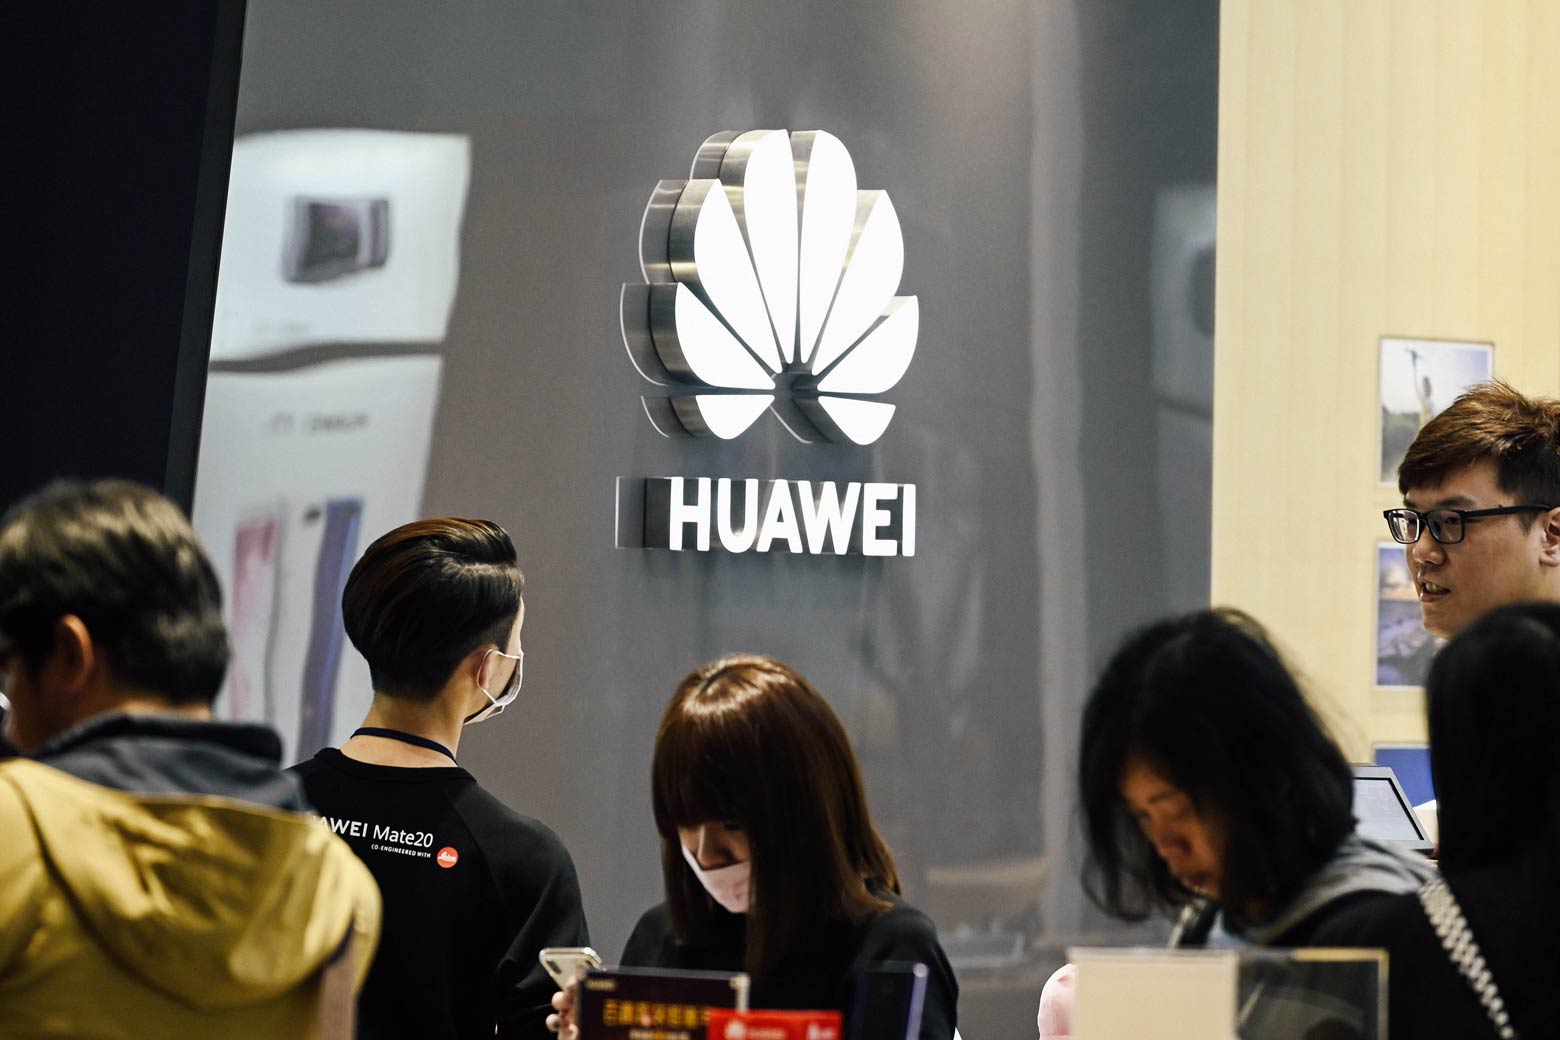 People stand next to a Huawei logo at a mall.